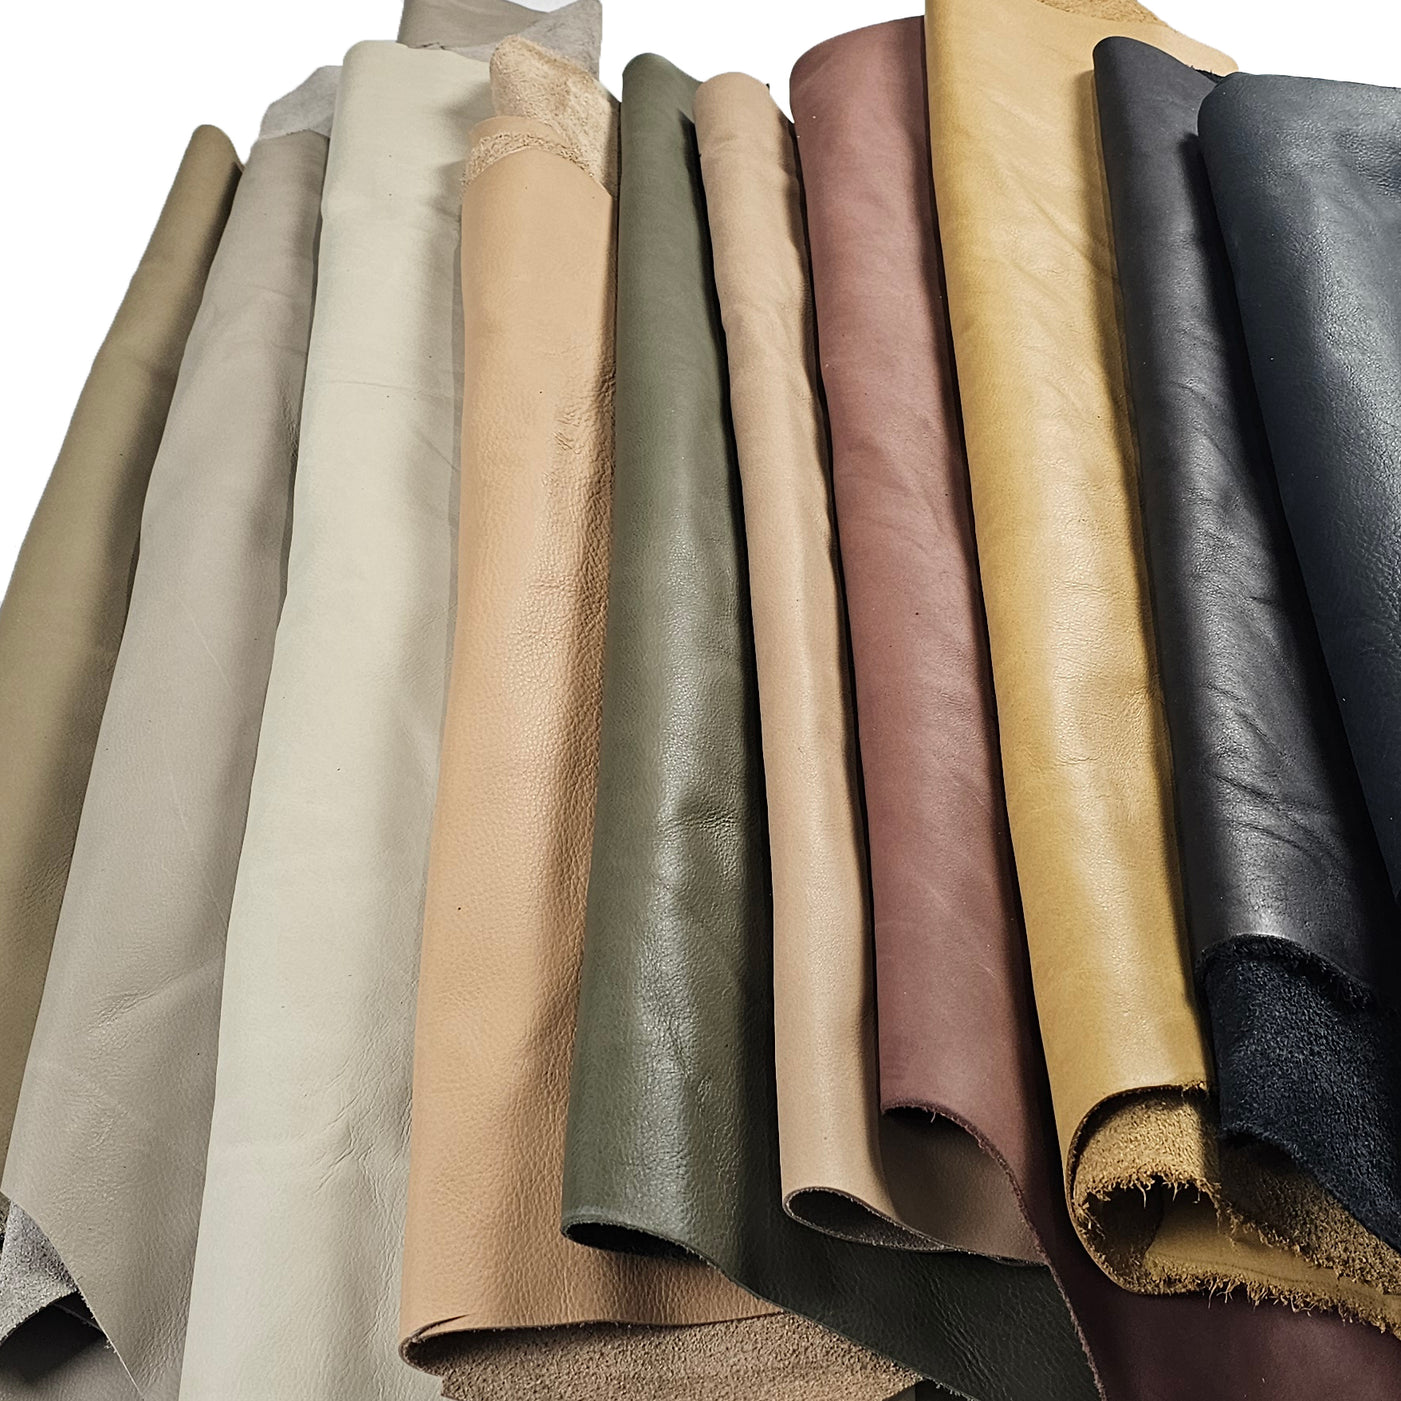 Assorted Full-grain Upholstery leather offcuts 3 - 5 sq. ft